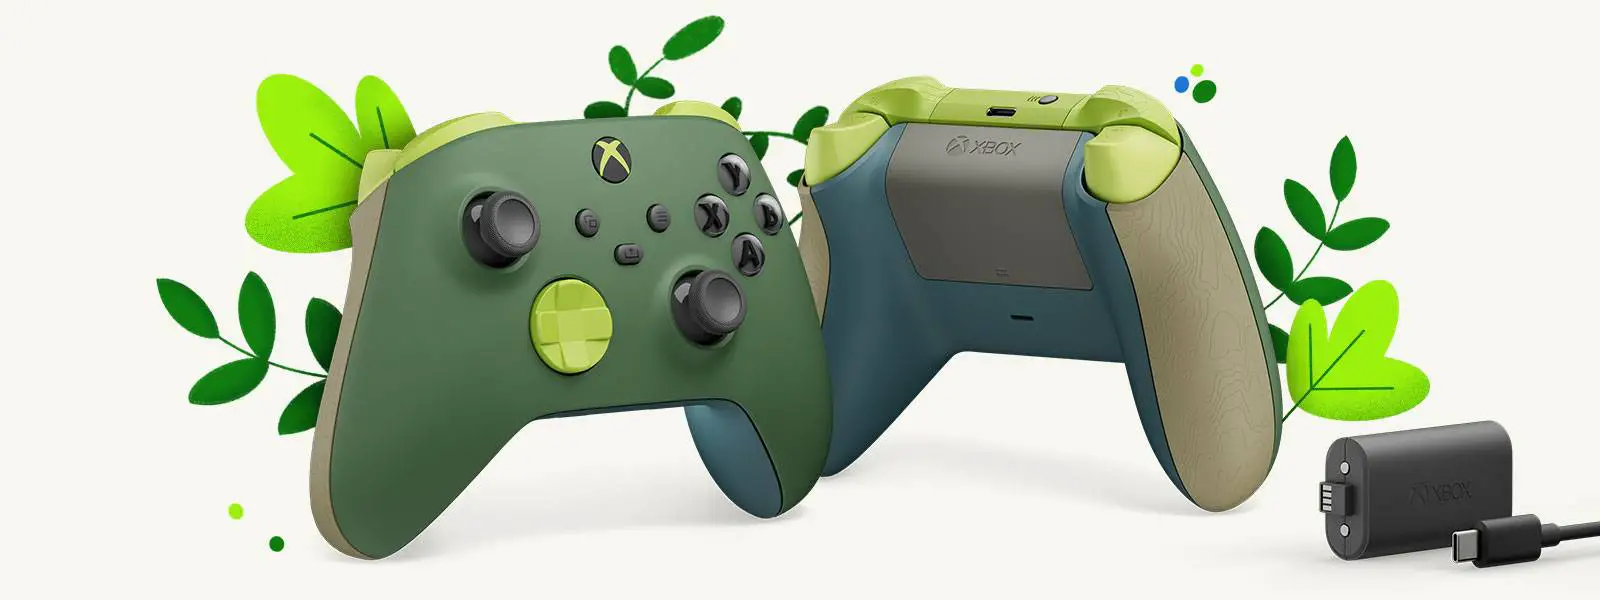 What’s Special About The New Remix Special Edition Xbox Controller?